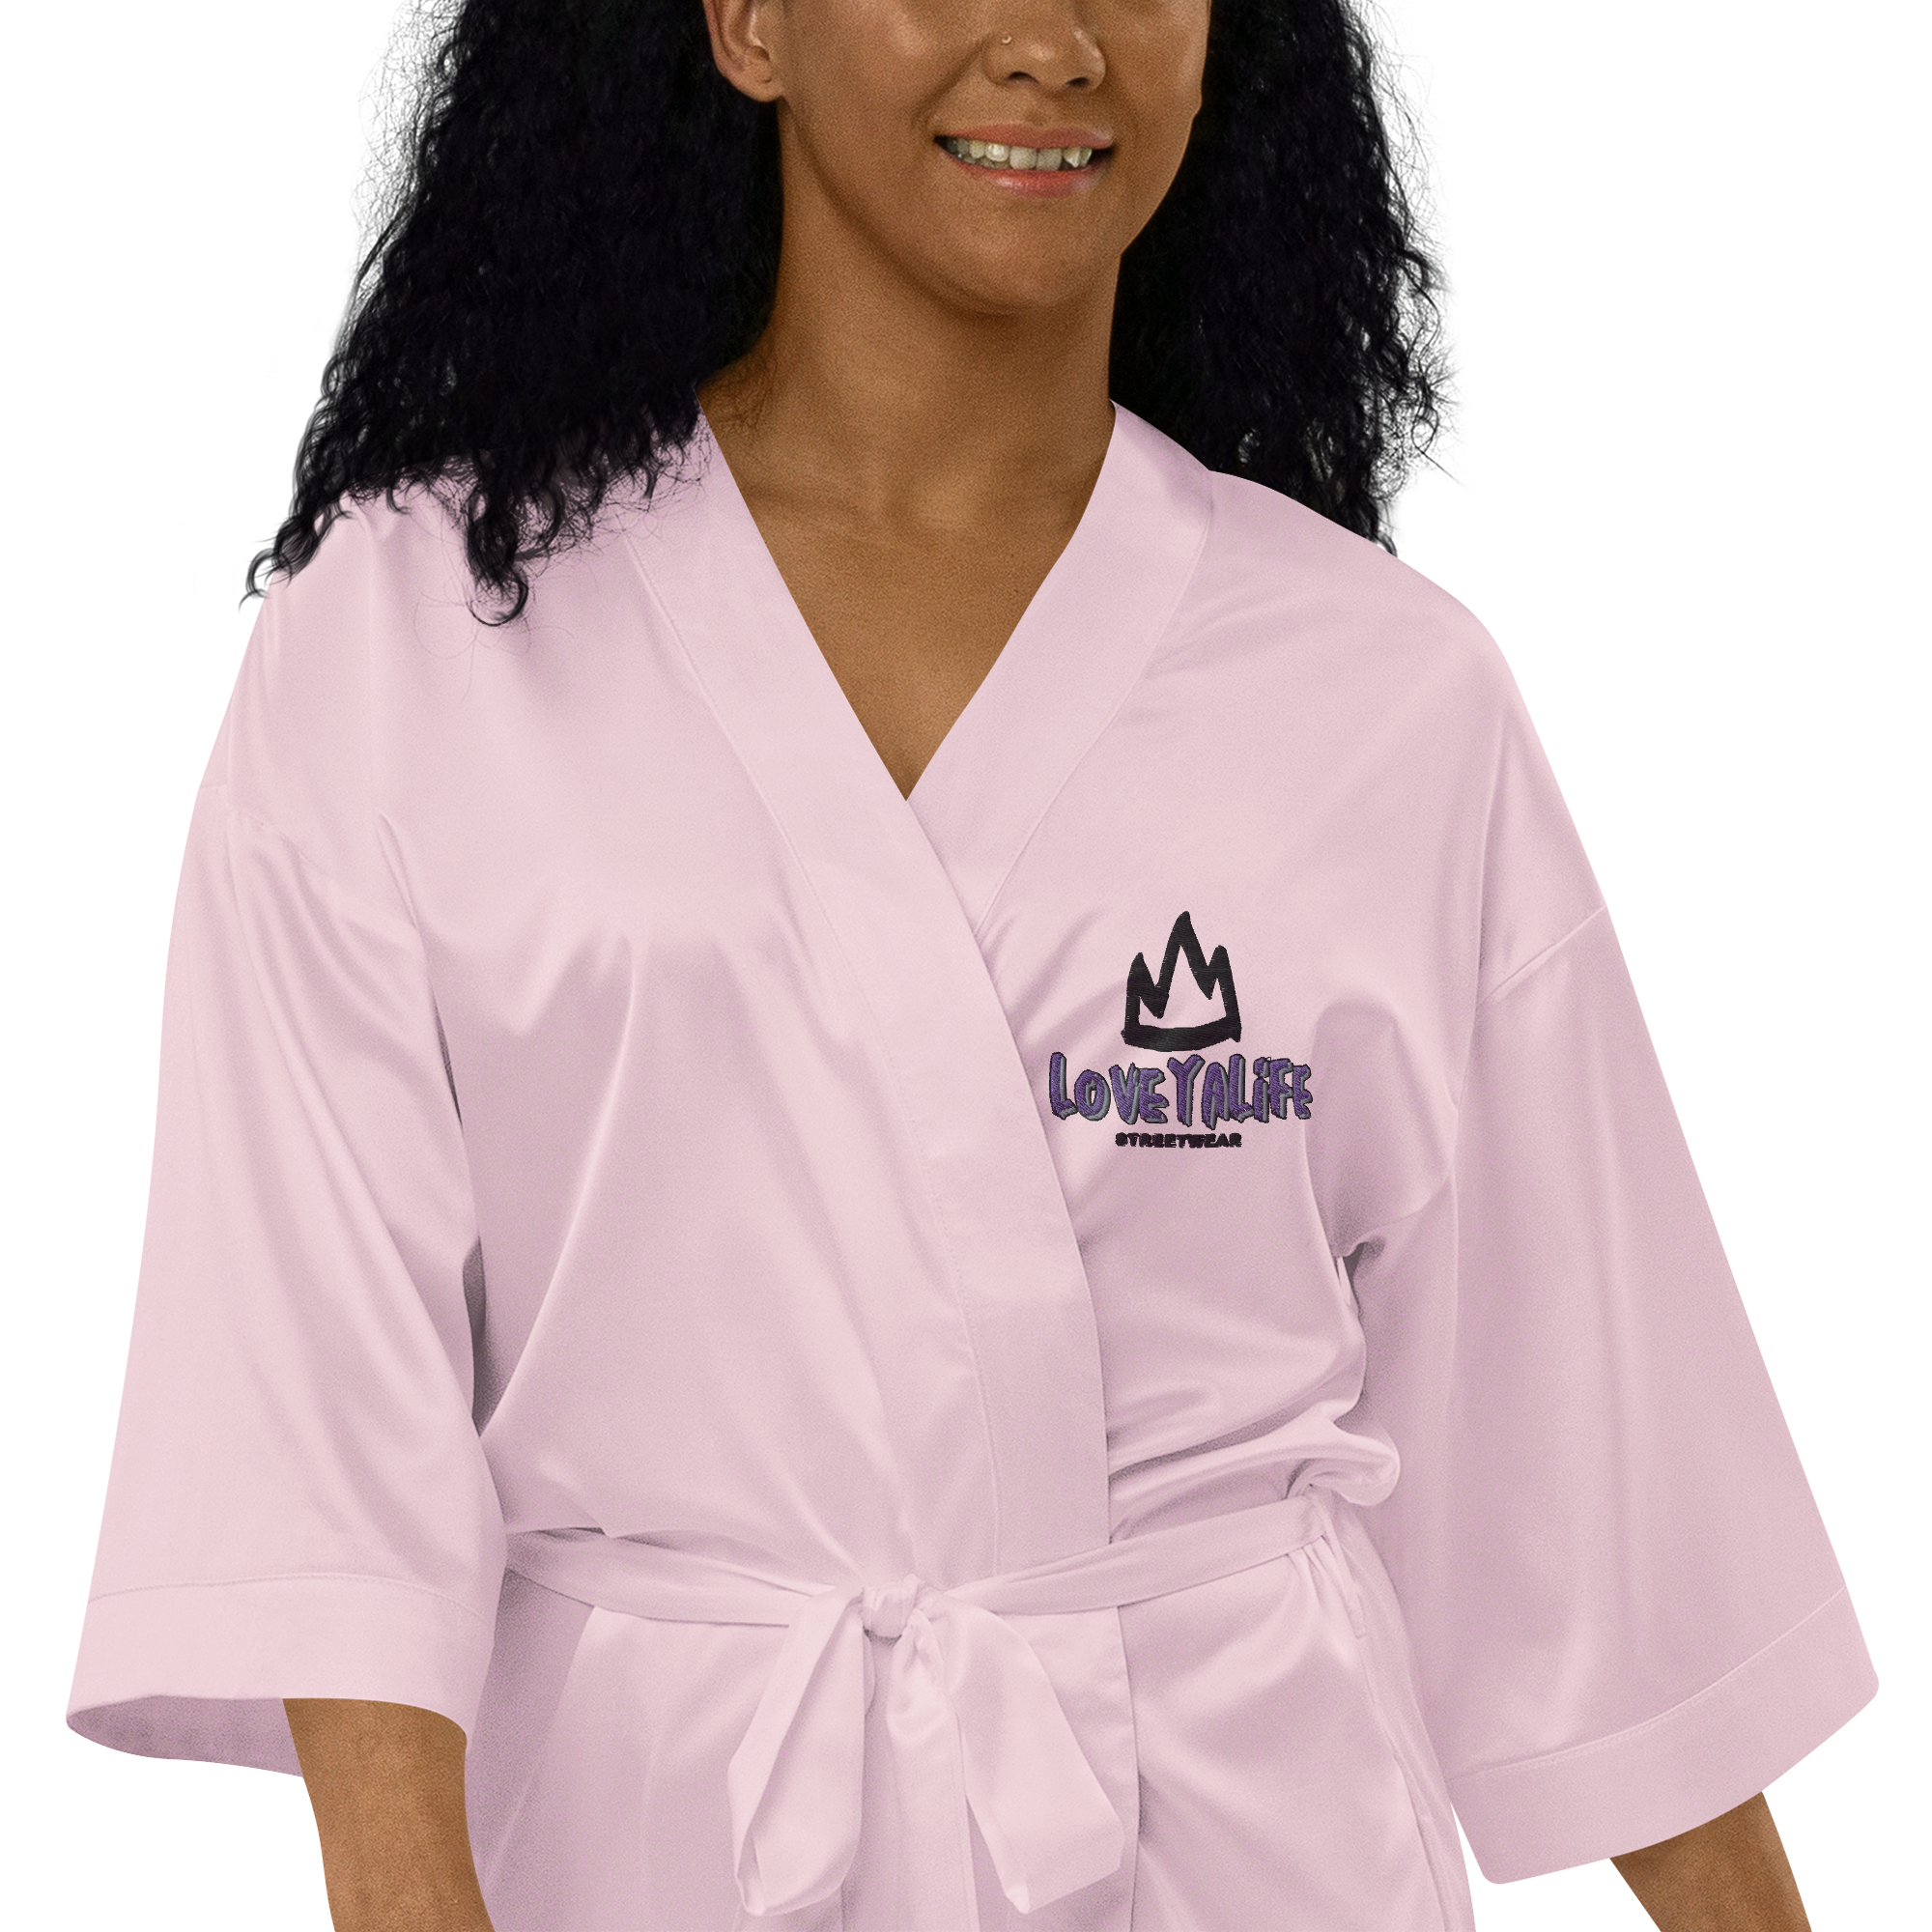 satin-robe-light-pink-zoomed-in-6604e433a6cc4